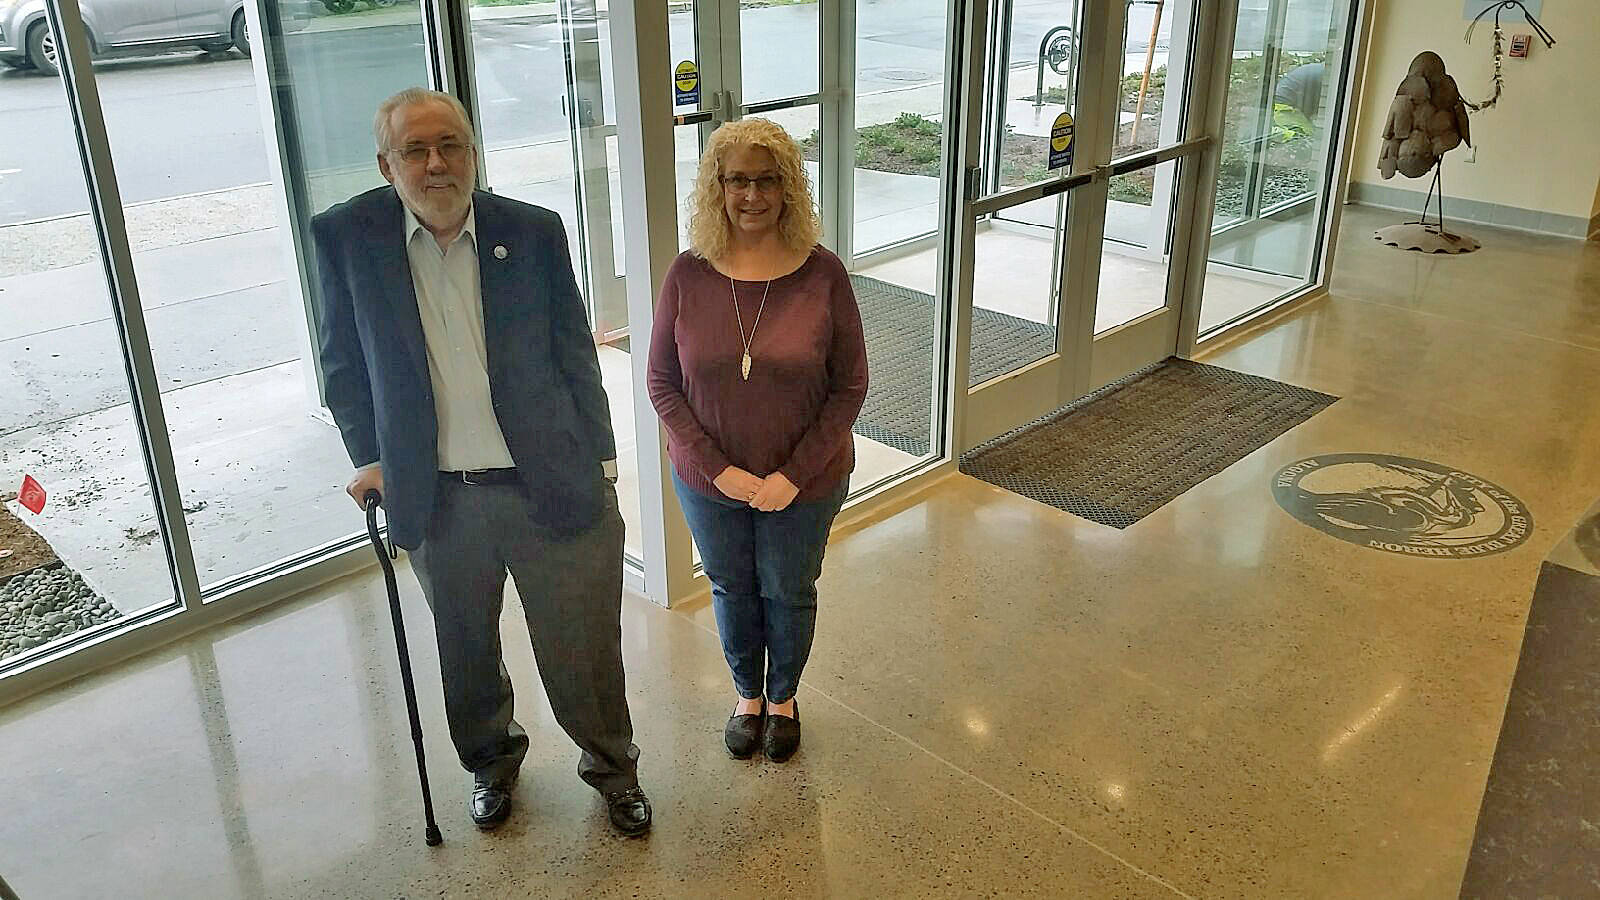 For Mayor Dave Hill and City Administrator Diana Quinn, Algona’s 
new City Hall brings comfort and room to do the community’s work. ROBERT WHALE, Auburn Reporter